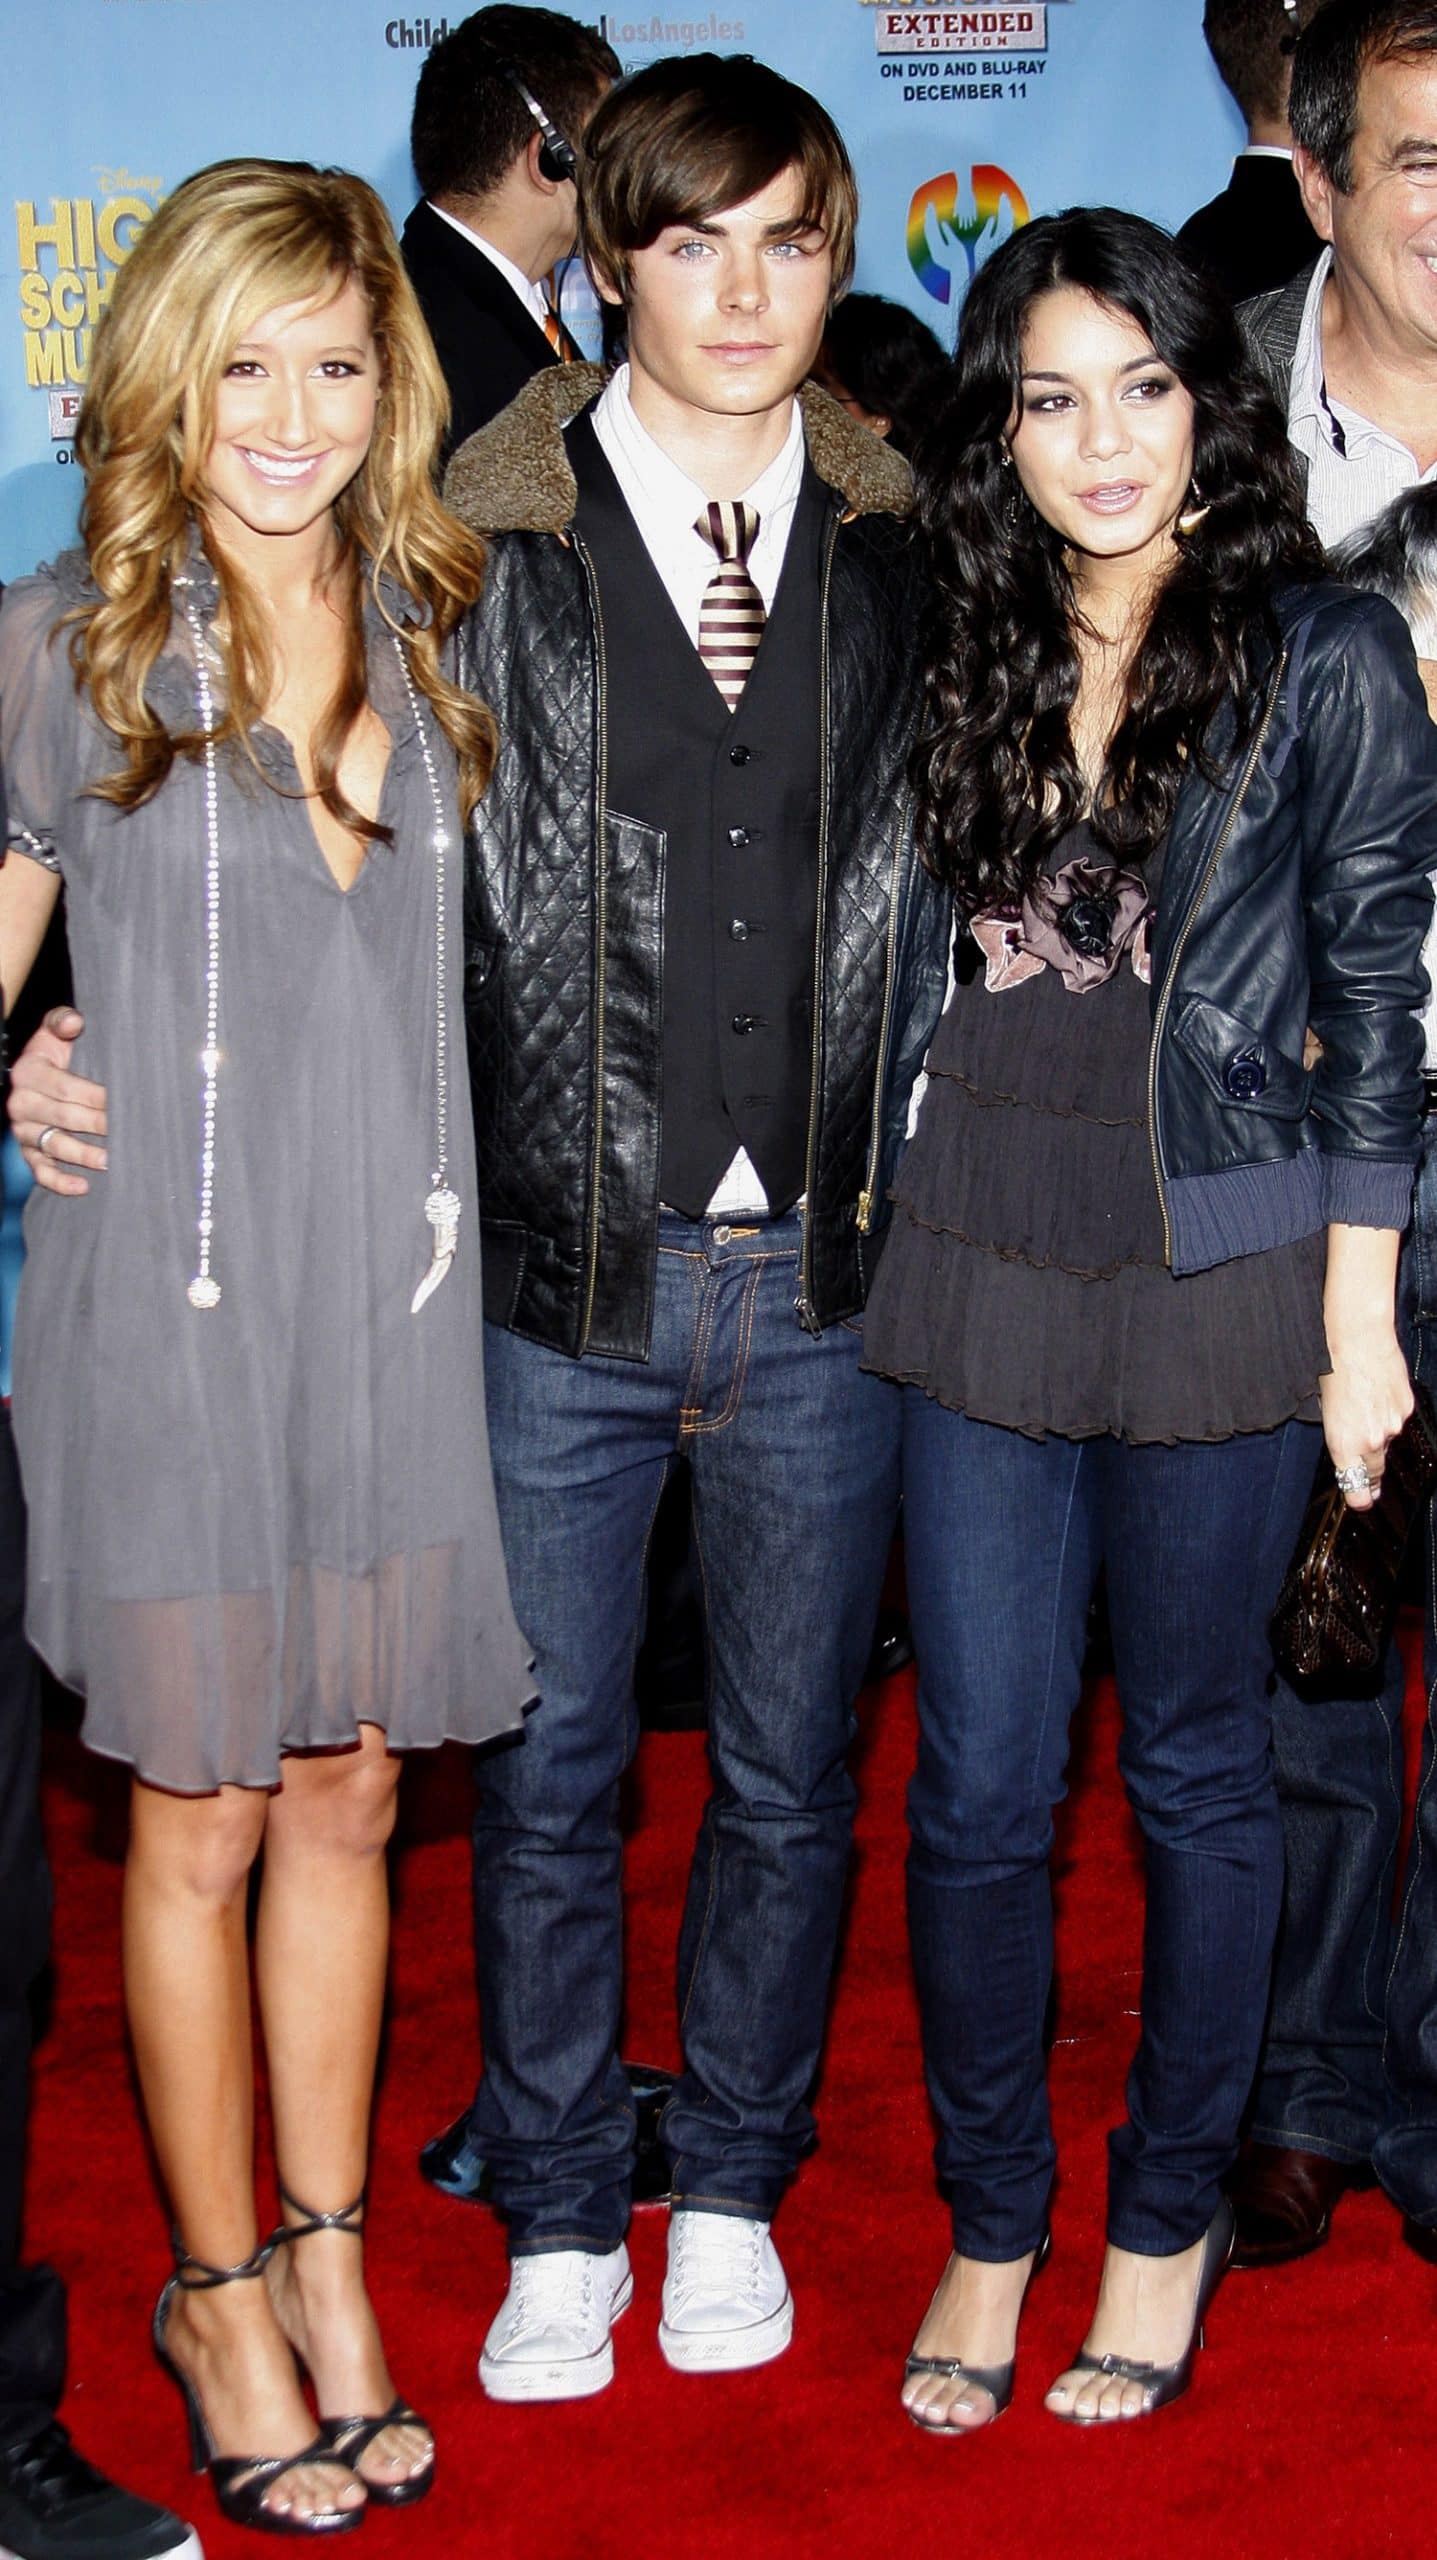 Ashley Tisdale, Zac Efron, and Vanessa Hudgens at the DVD release premiere of "High School Musical 2: Extended Edition"